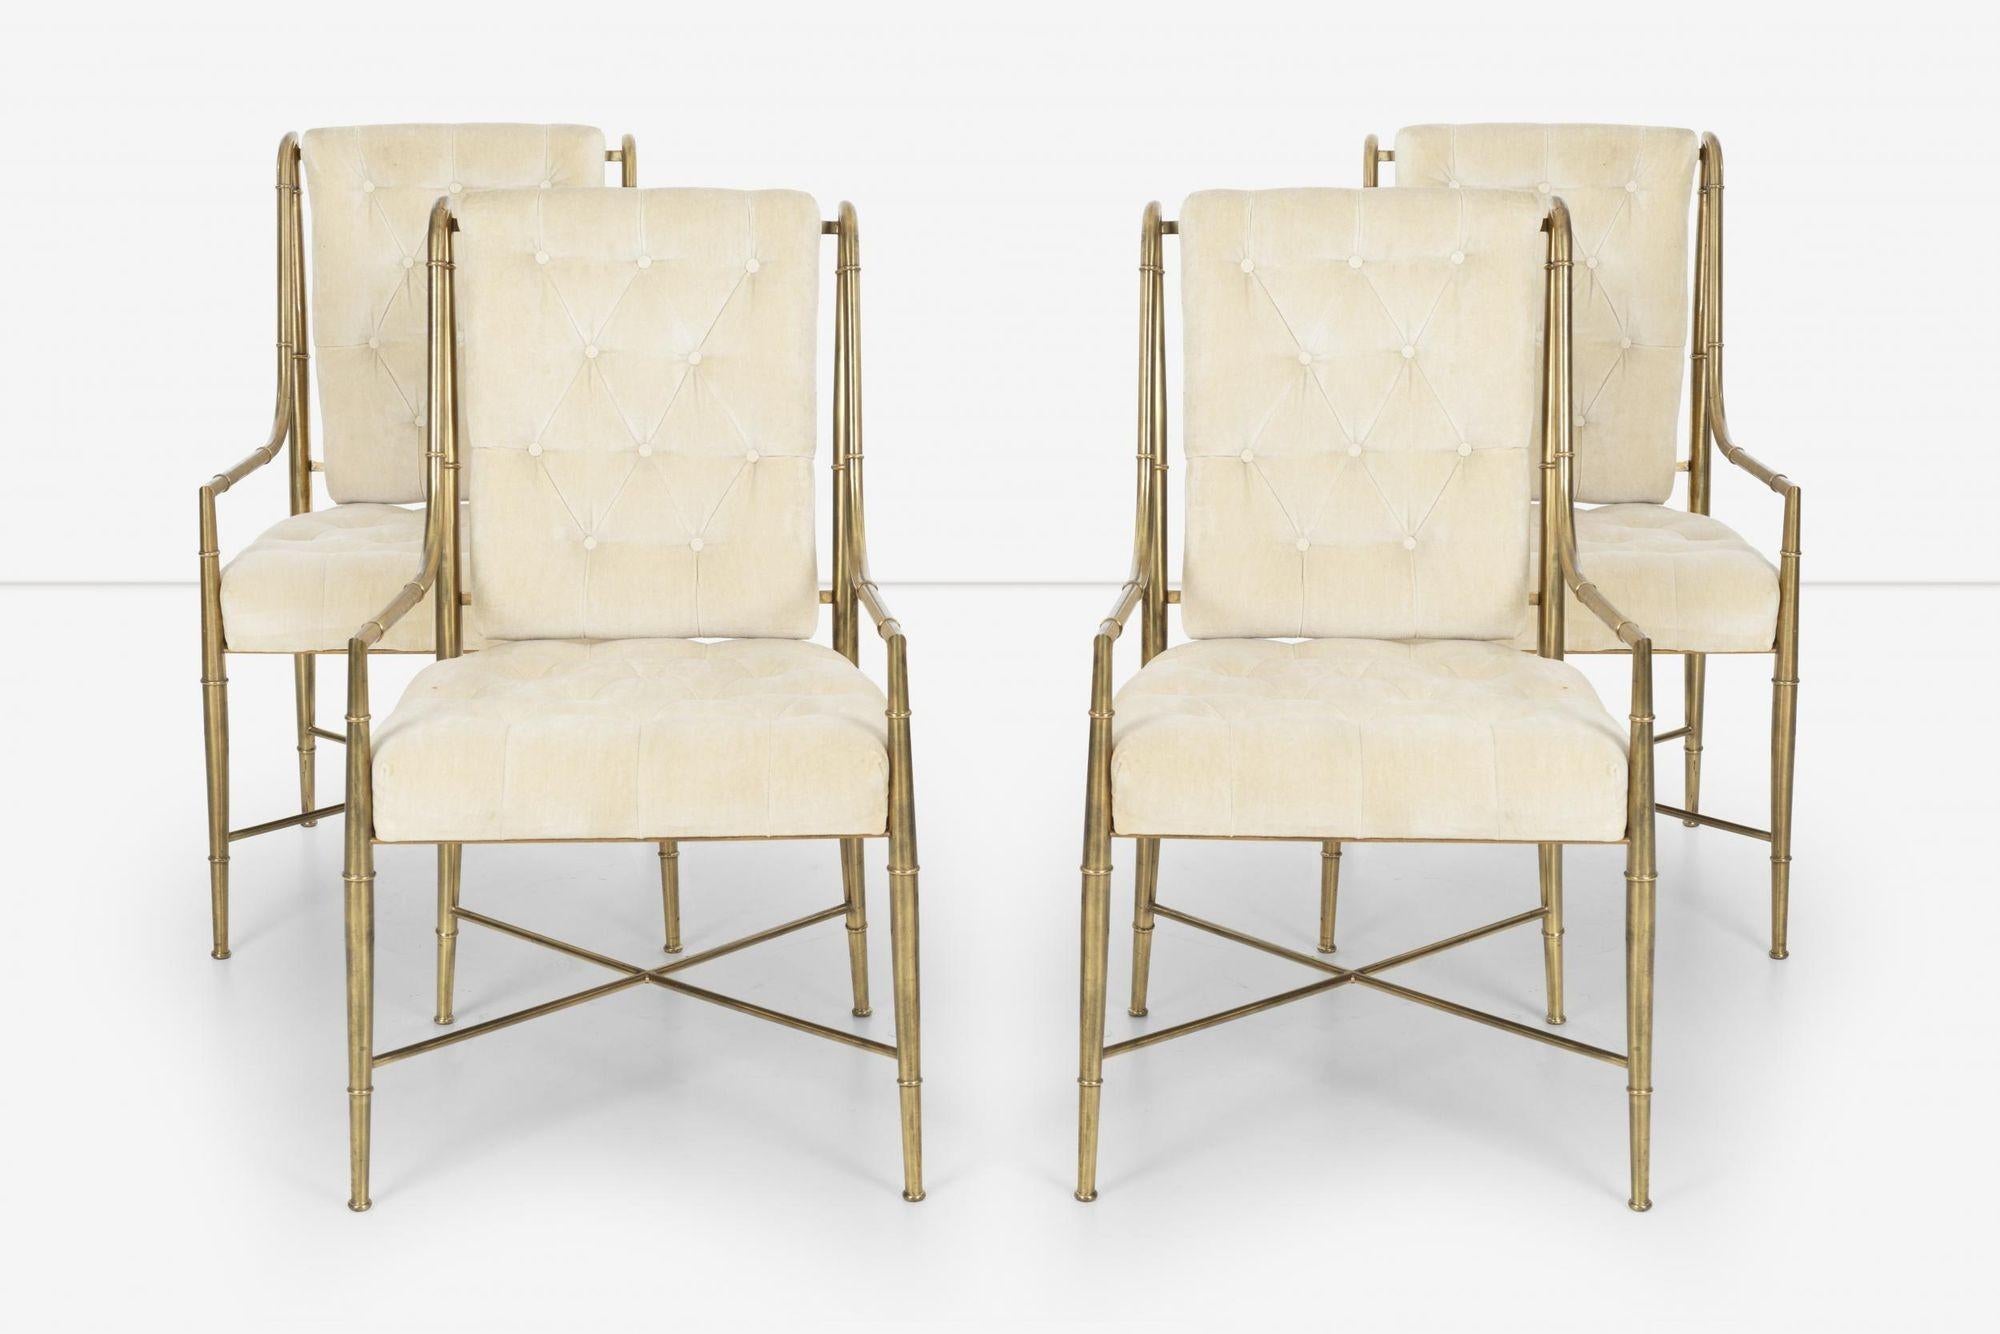 Set of four Mastercraft imperial armchairs by Weiman/Warren Lloyd, made in Italy, circa 1975 Brass frames with cotton velvet seat and back button tufted.

Labels on underside Weiman/ Warren.